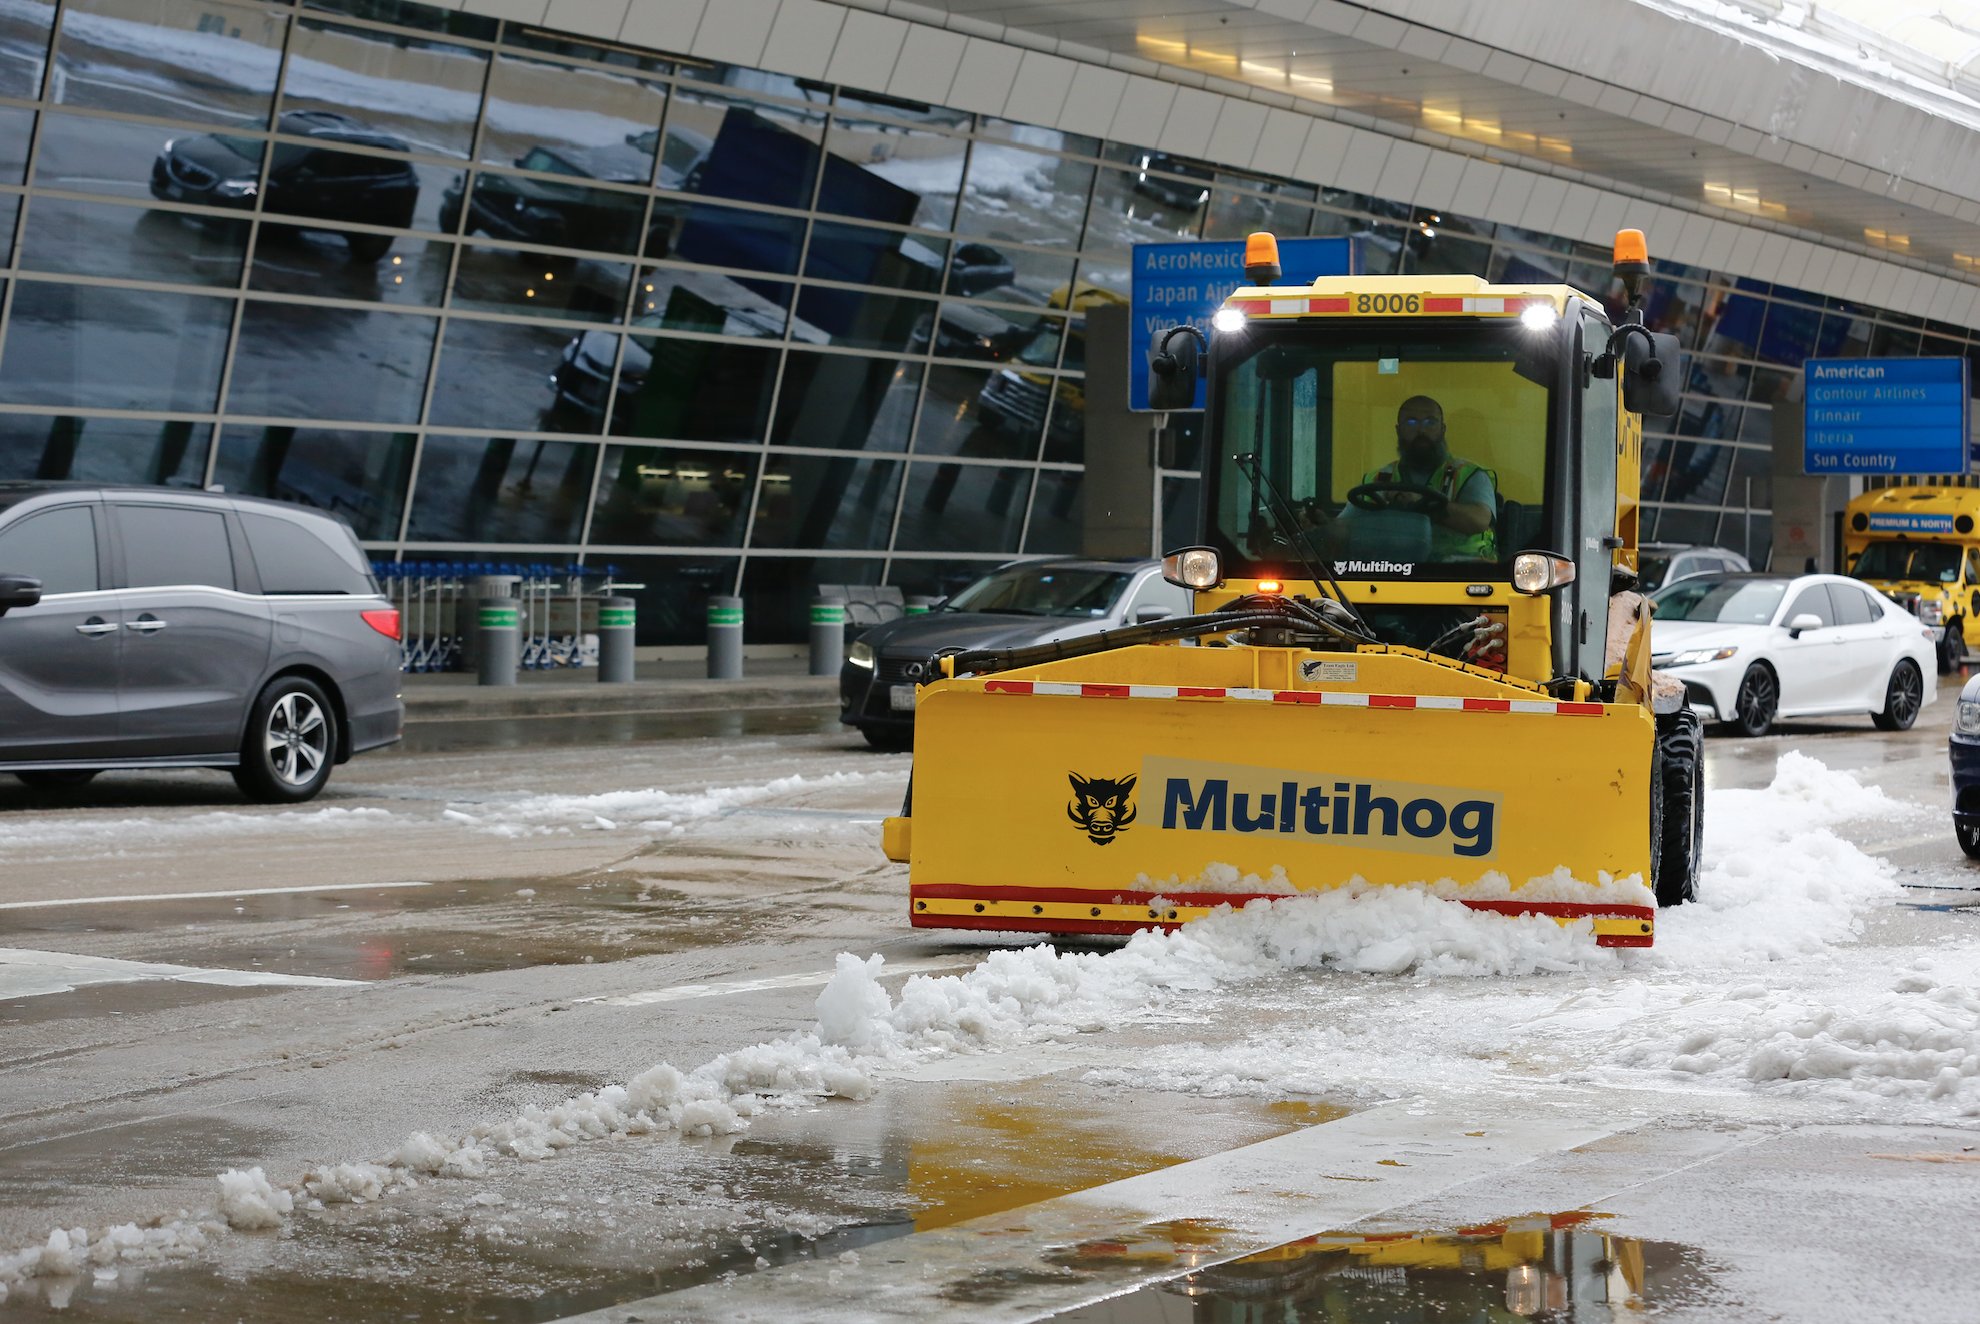 DFW Airport - ice removal operations